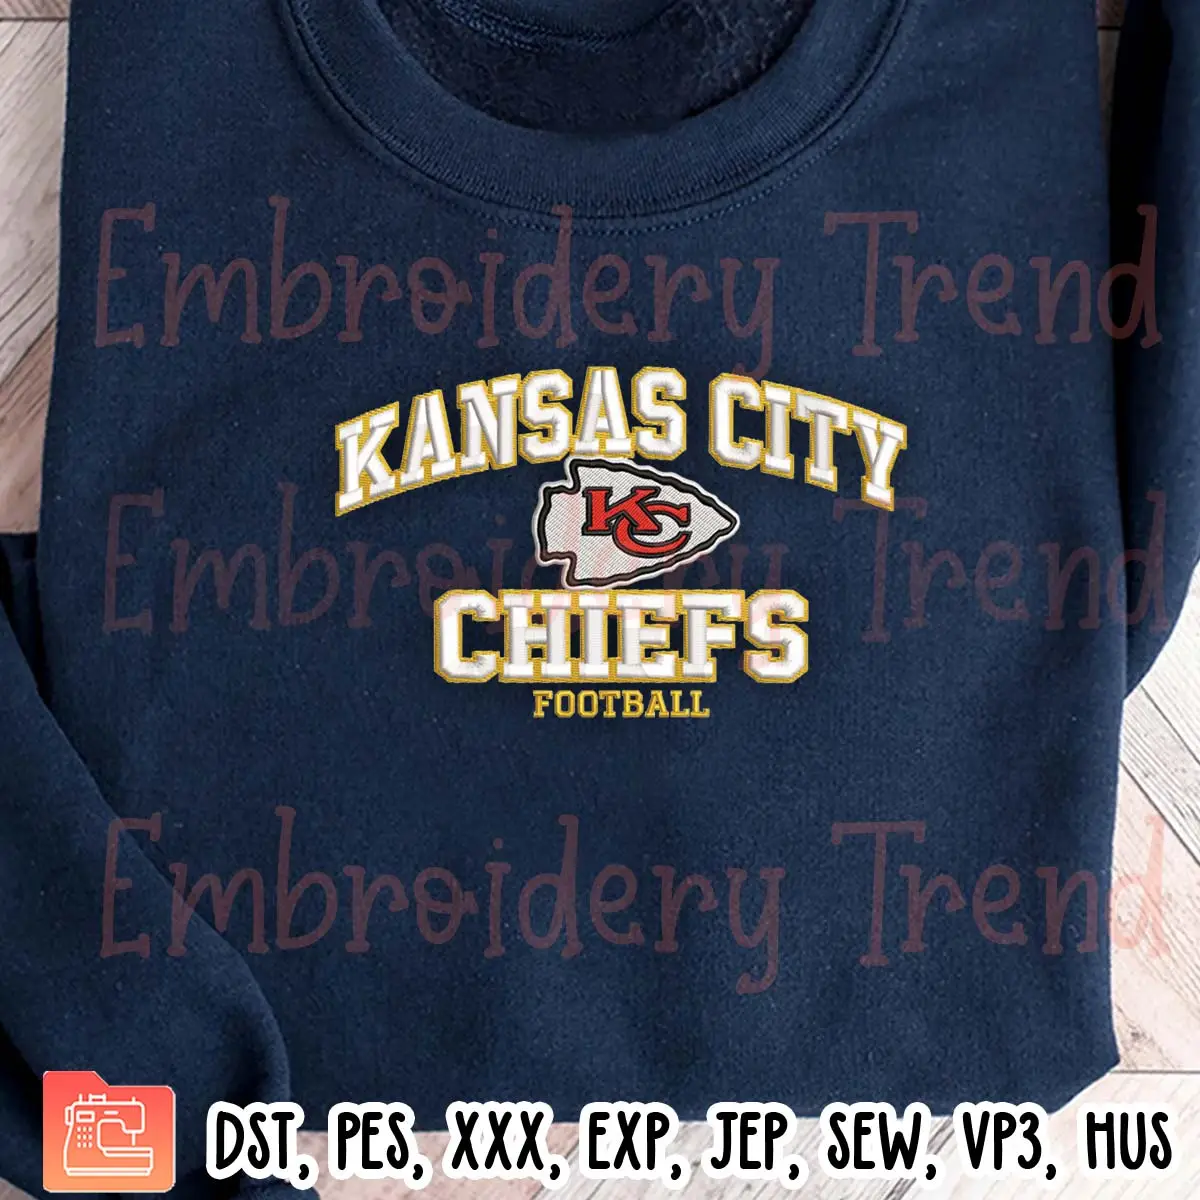 Kansas City Chiefs Football Embroidery Design, NFL Football Embroidery Digitizing Pes File